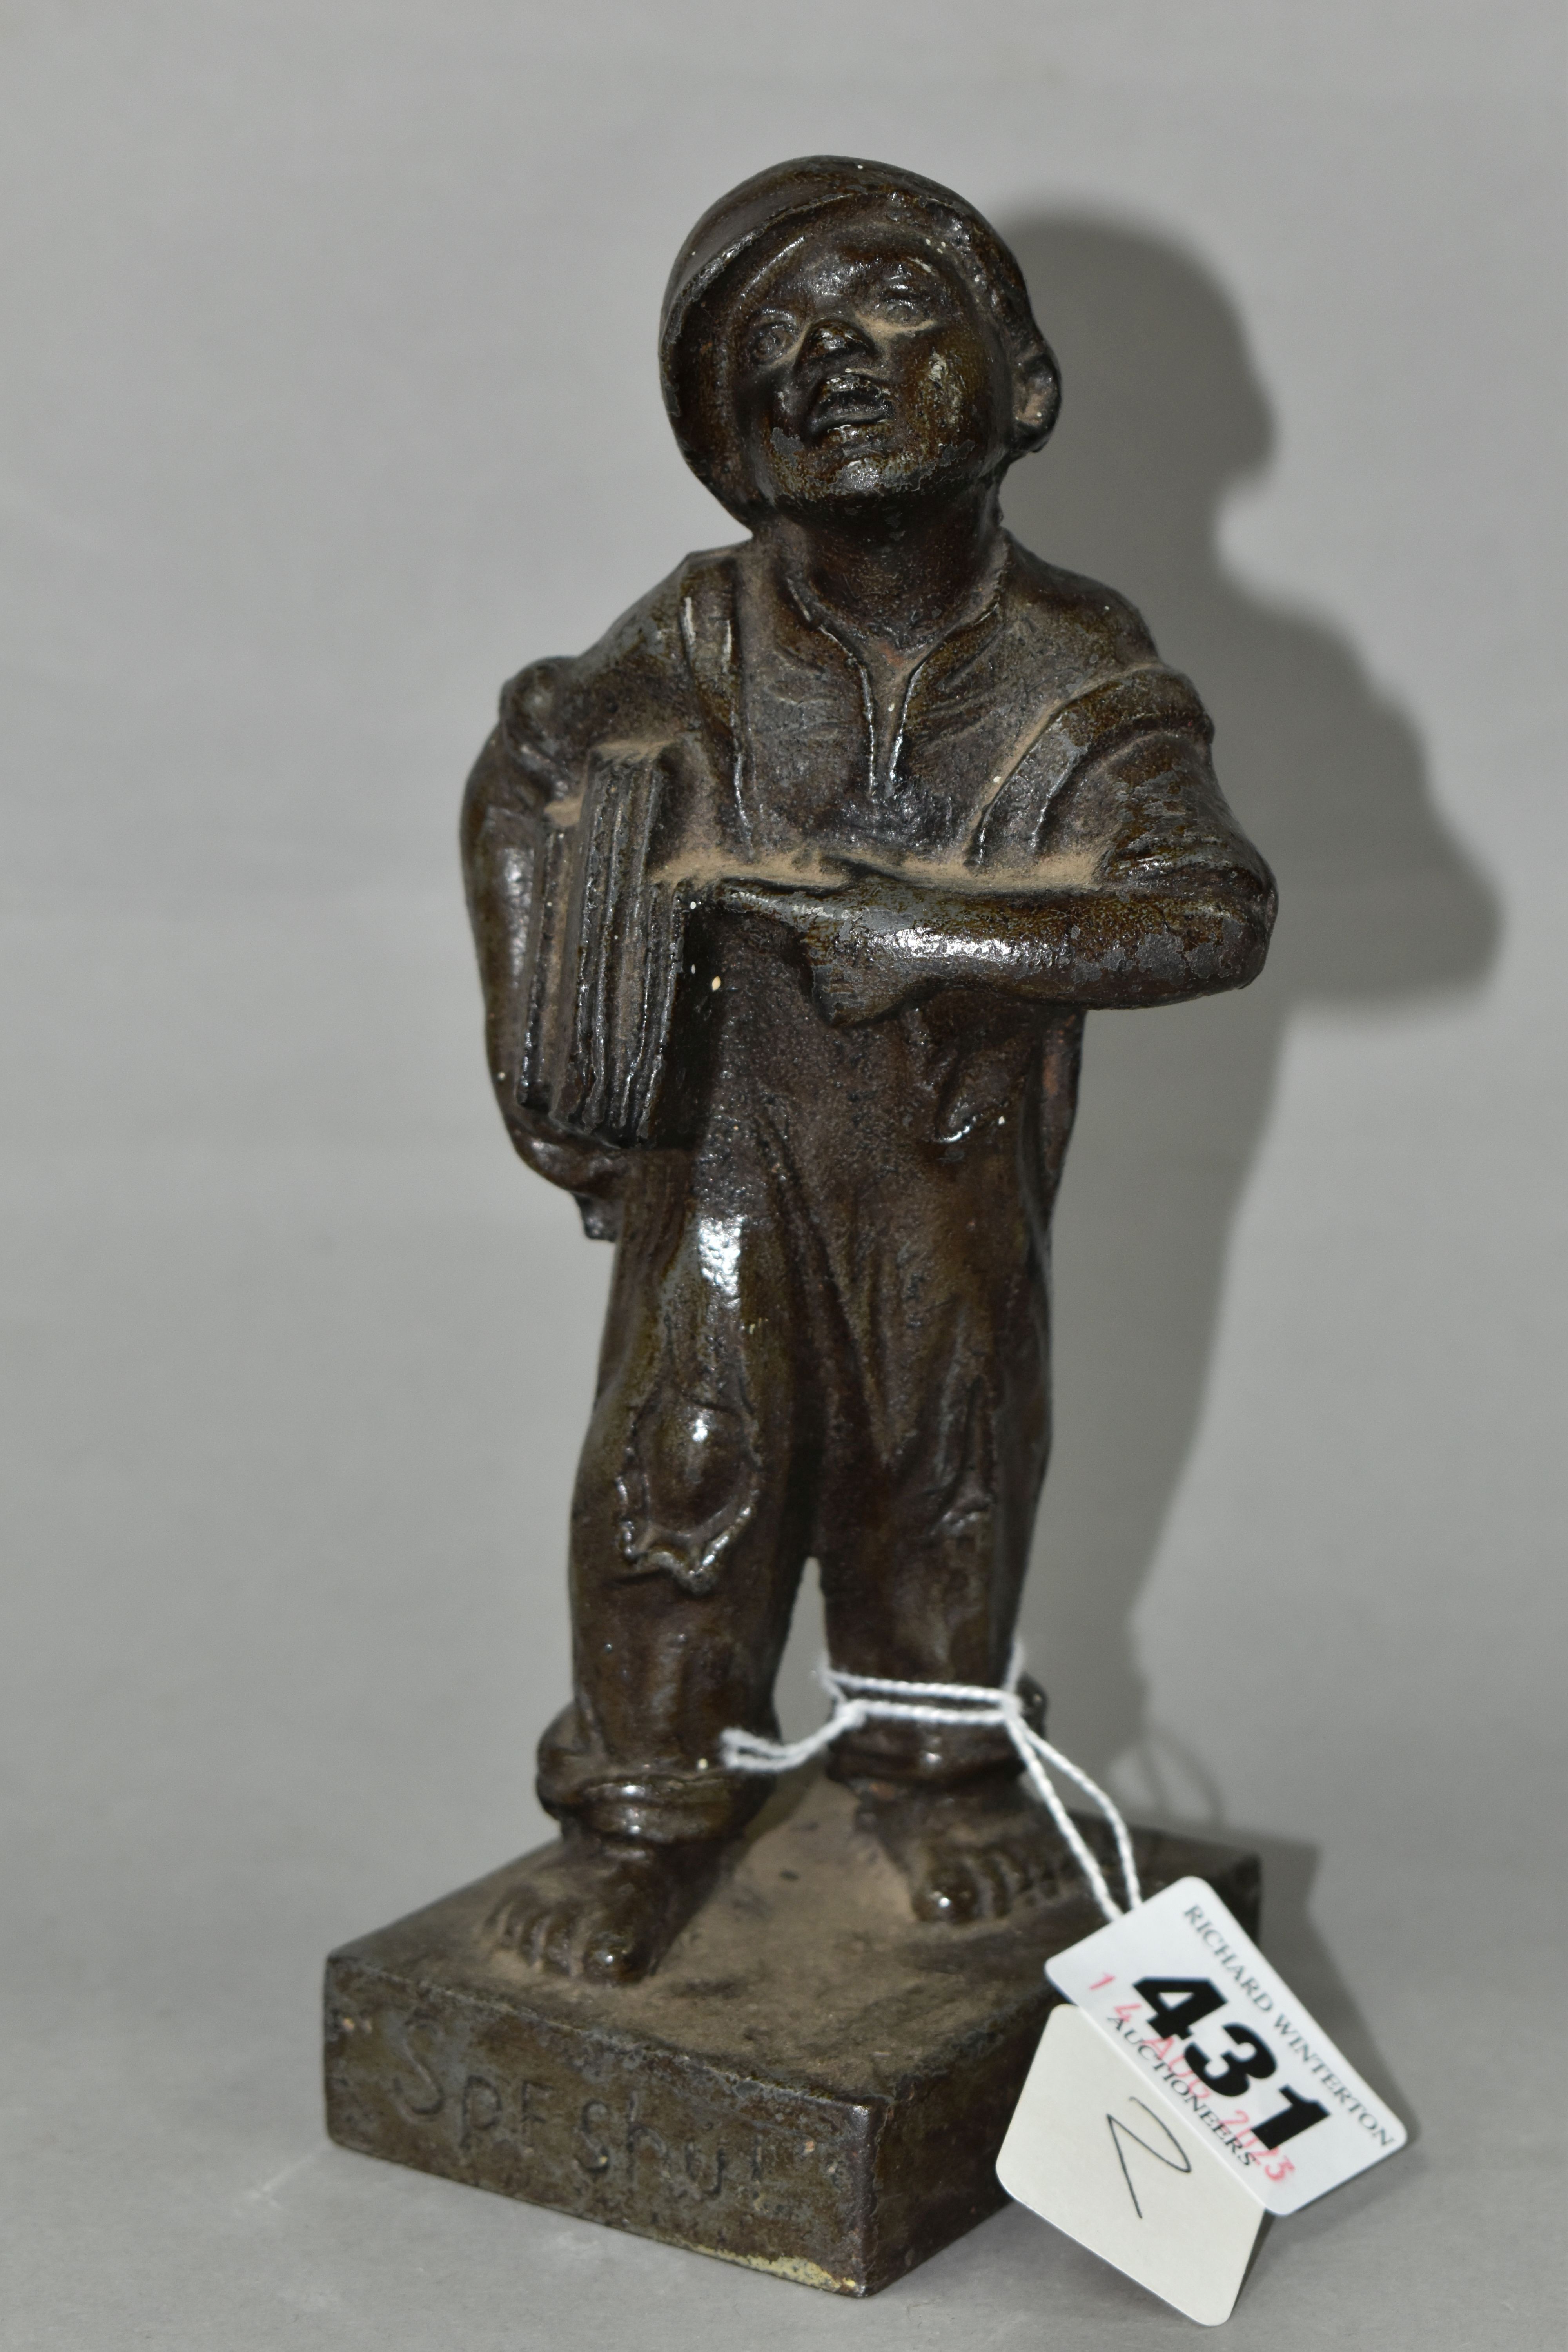 A BRONZED CAST IRON QUALCAST ADVERTISING FIGURE OF A NEWS BOY, titled 'Speshul', impressed